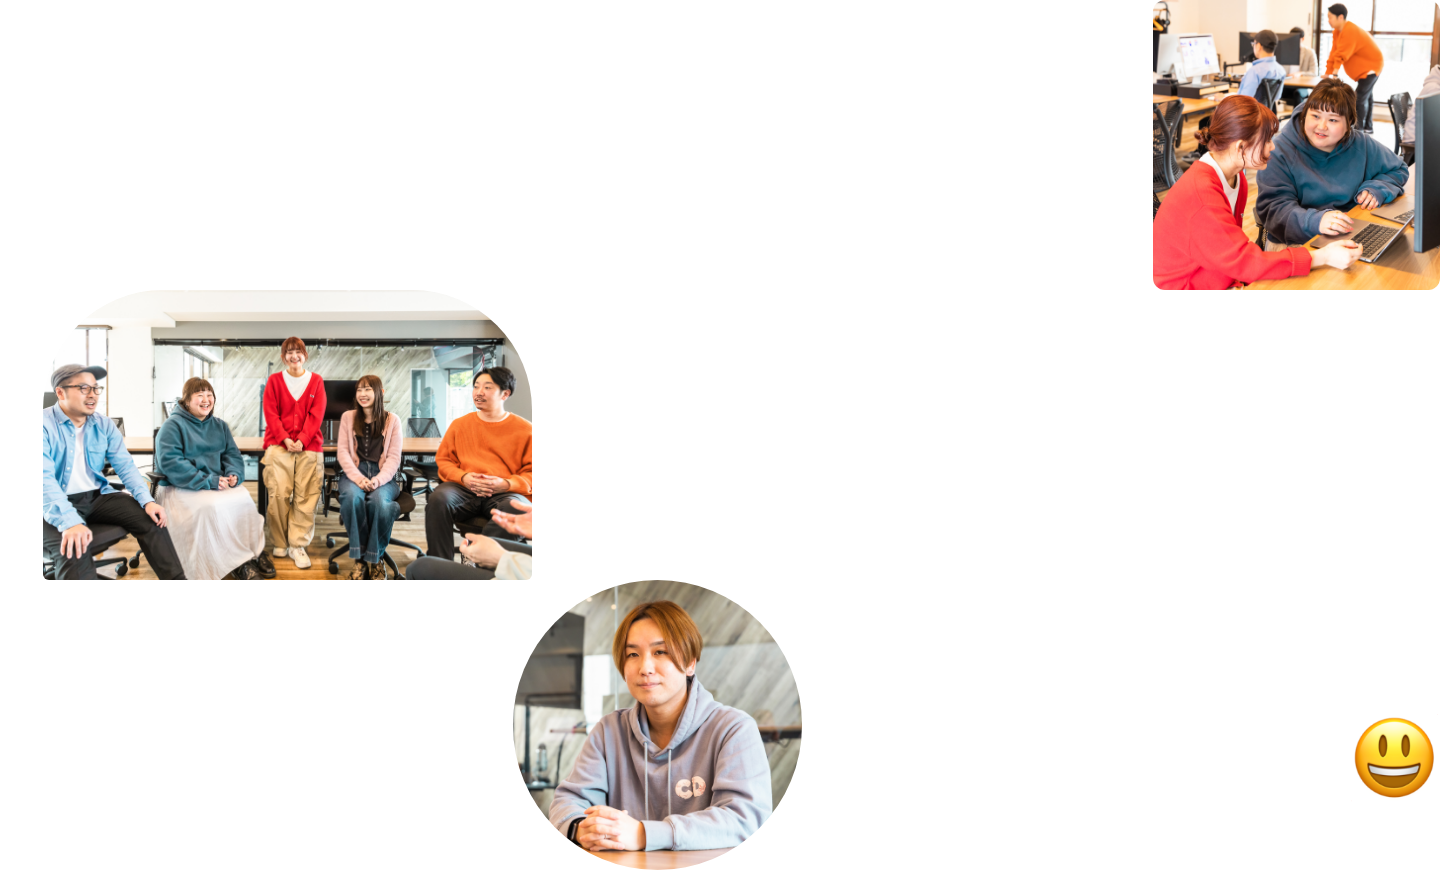 WorkHard and Play like a child